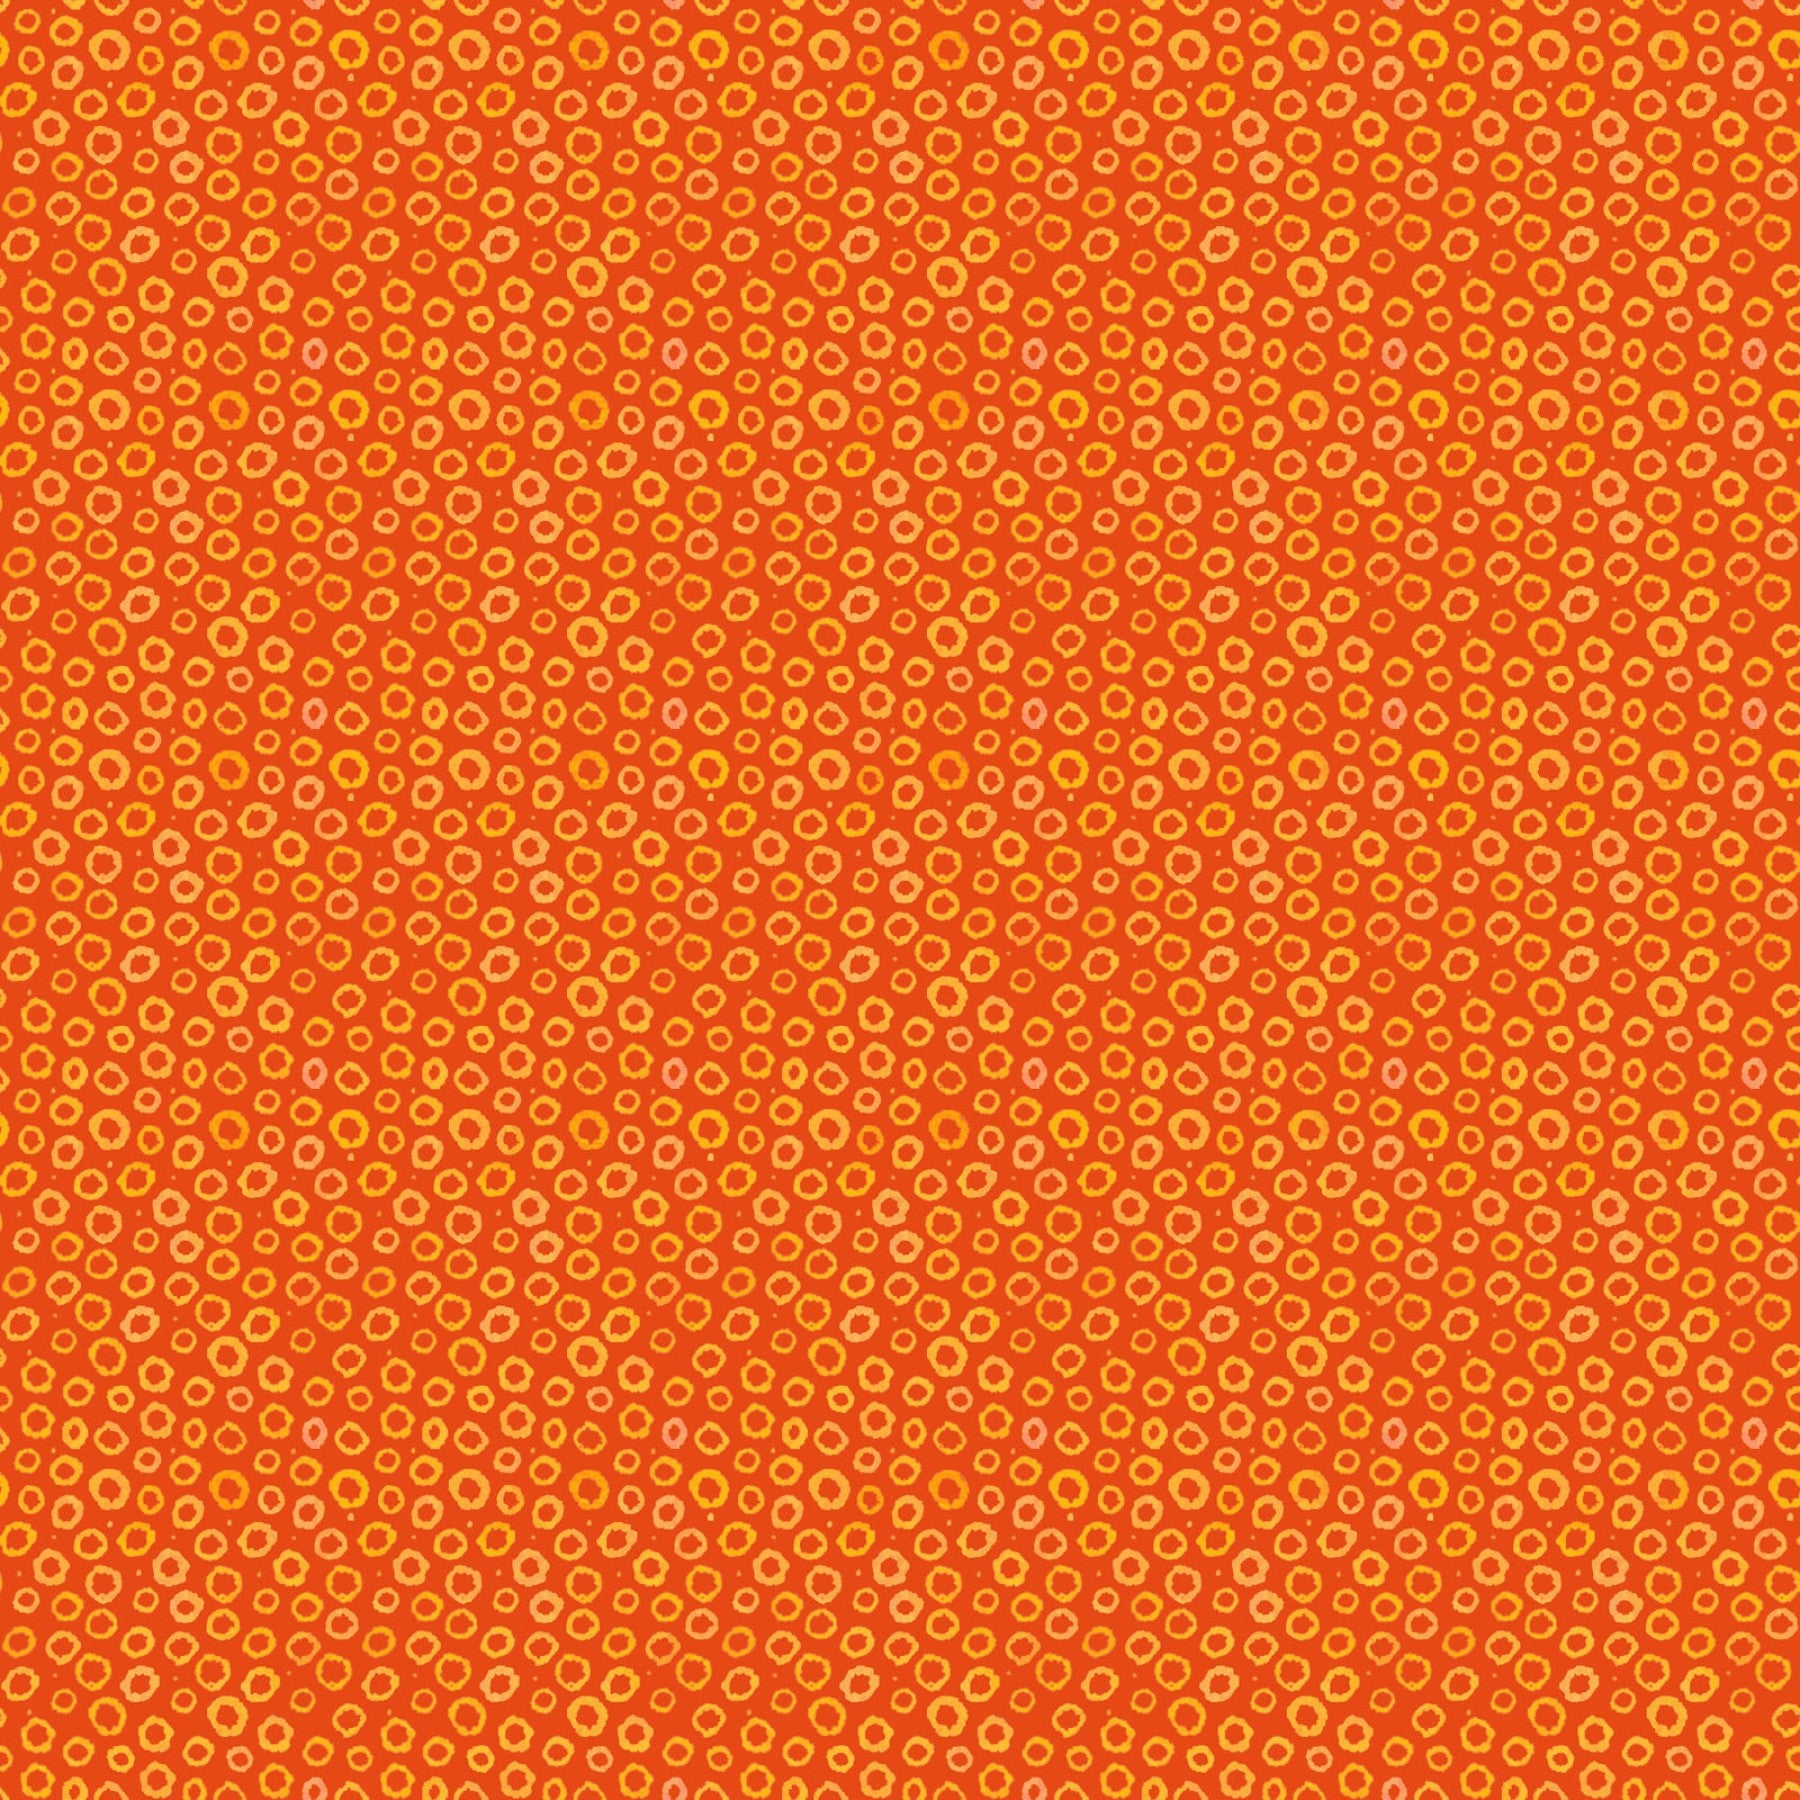 Zooville Quilt Fabric - Aloha Dot in Orange - FLZS D114 O